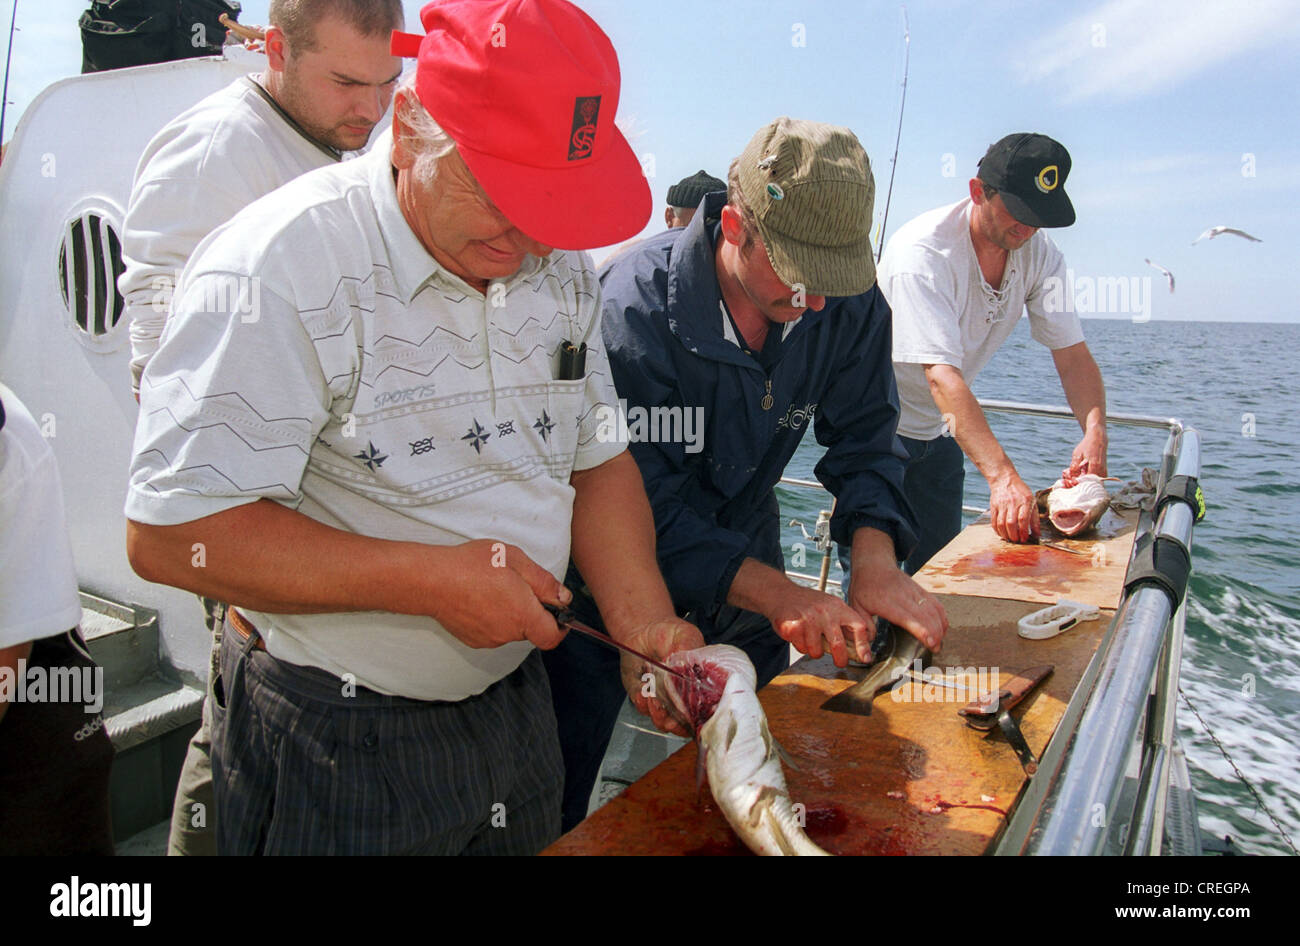 Anglers cleaning fish, Baltic Sea, Germany Stock Photo